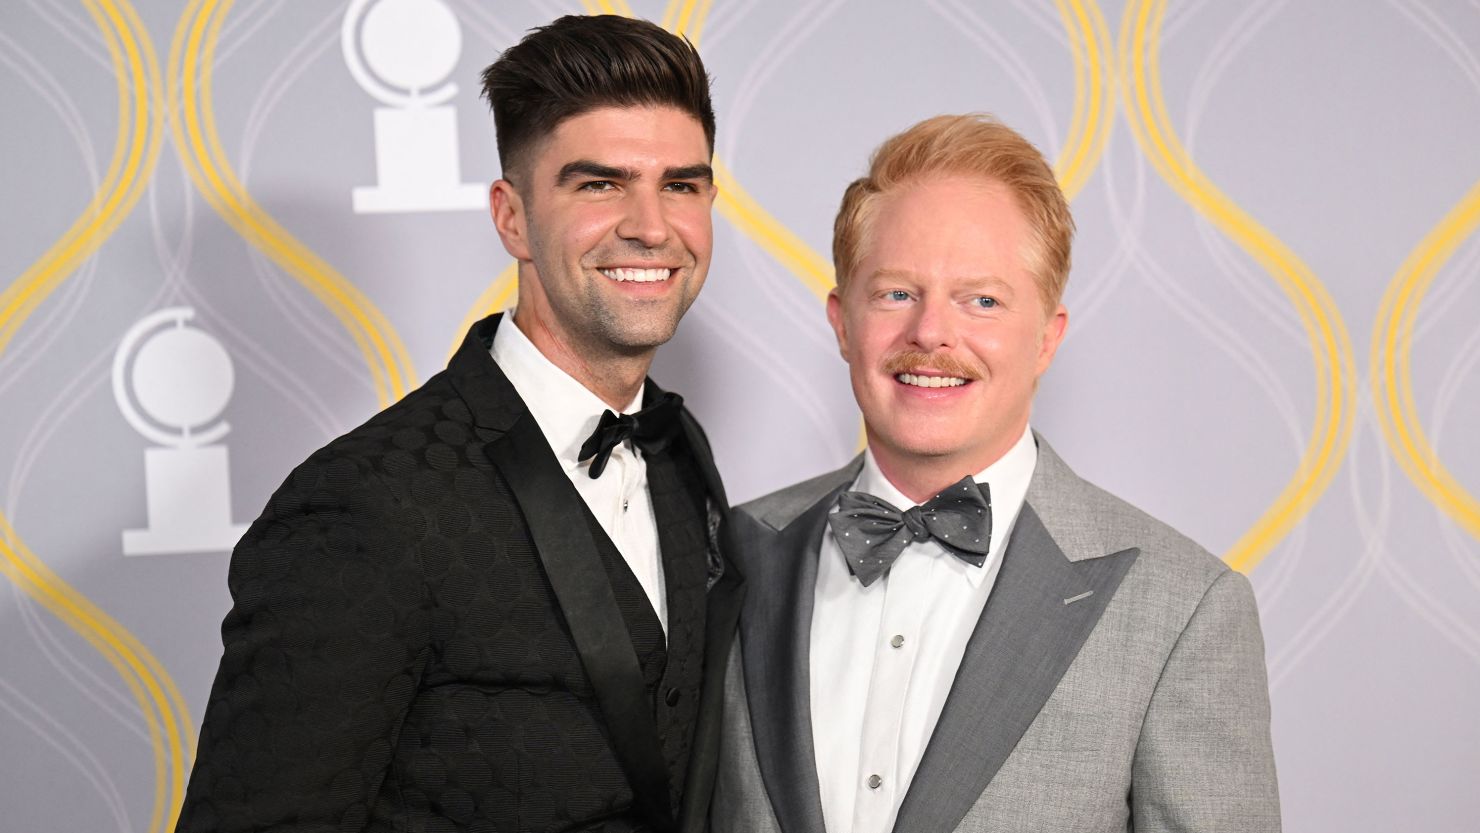 US actor Jesse Tyler Ferguson and husband Justin Mikita (L) attend the 75th annual Tony awards at Radio City Music Hall on June 12, 2022 in New York city.